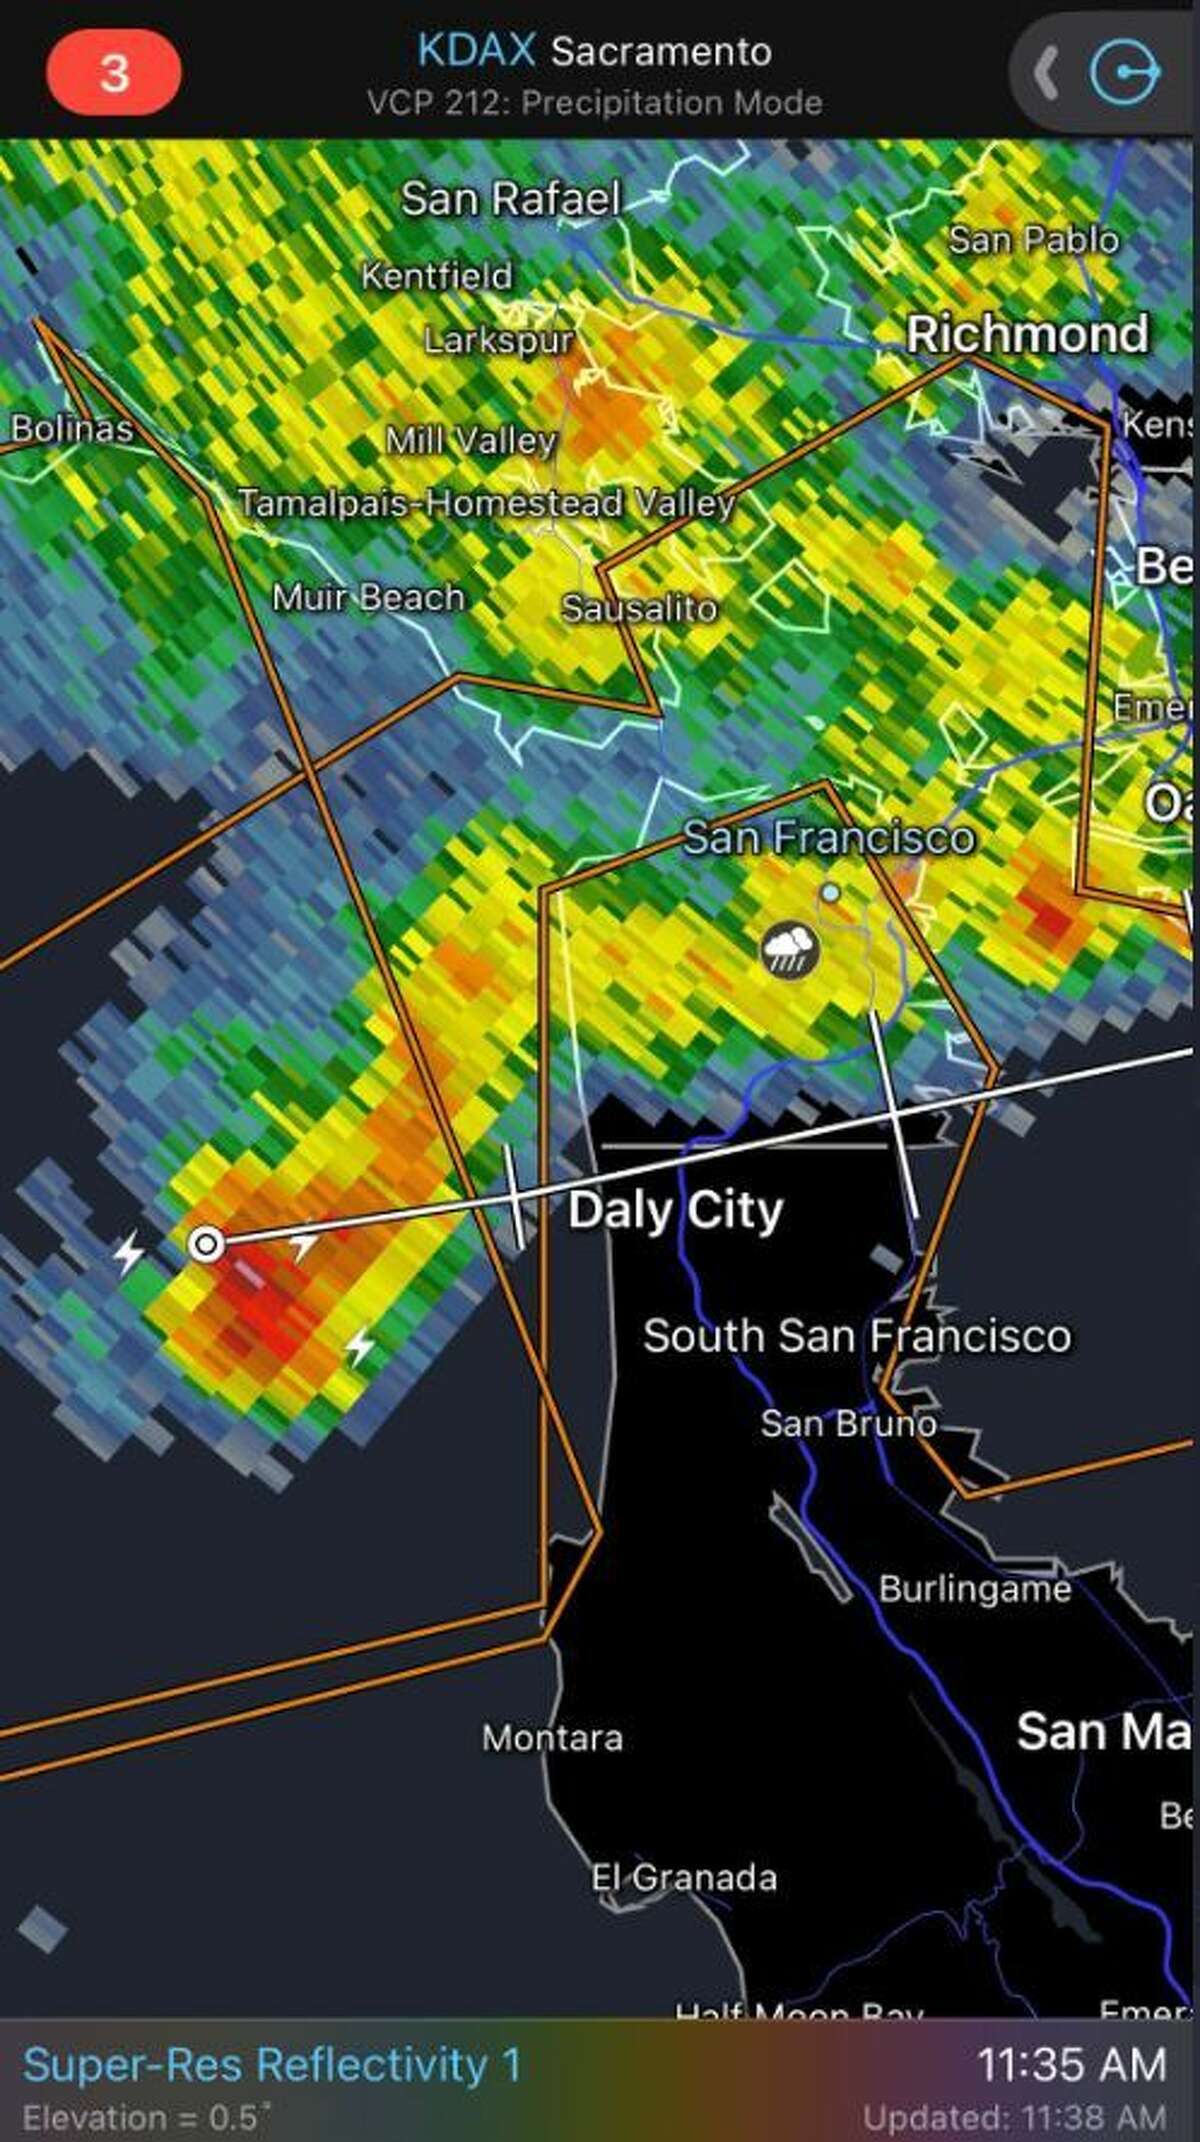 Radar images showed  strong thunderstorm cell quickly heading toward Daly City and the west side of San Francisco. 